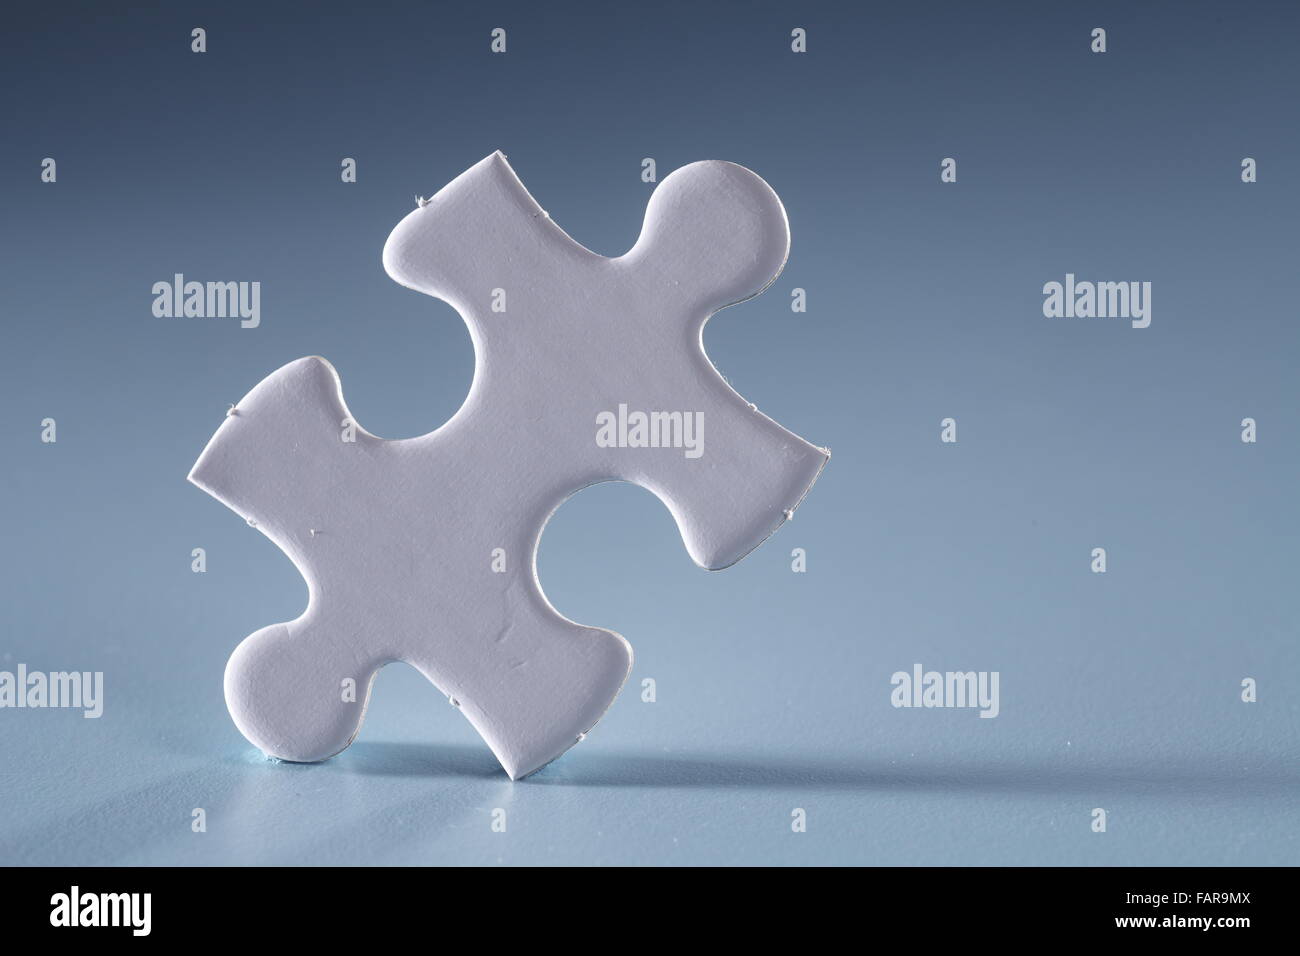 Single jigsaw piece isolated on the blue background. Stock Photo